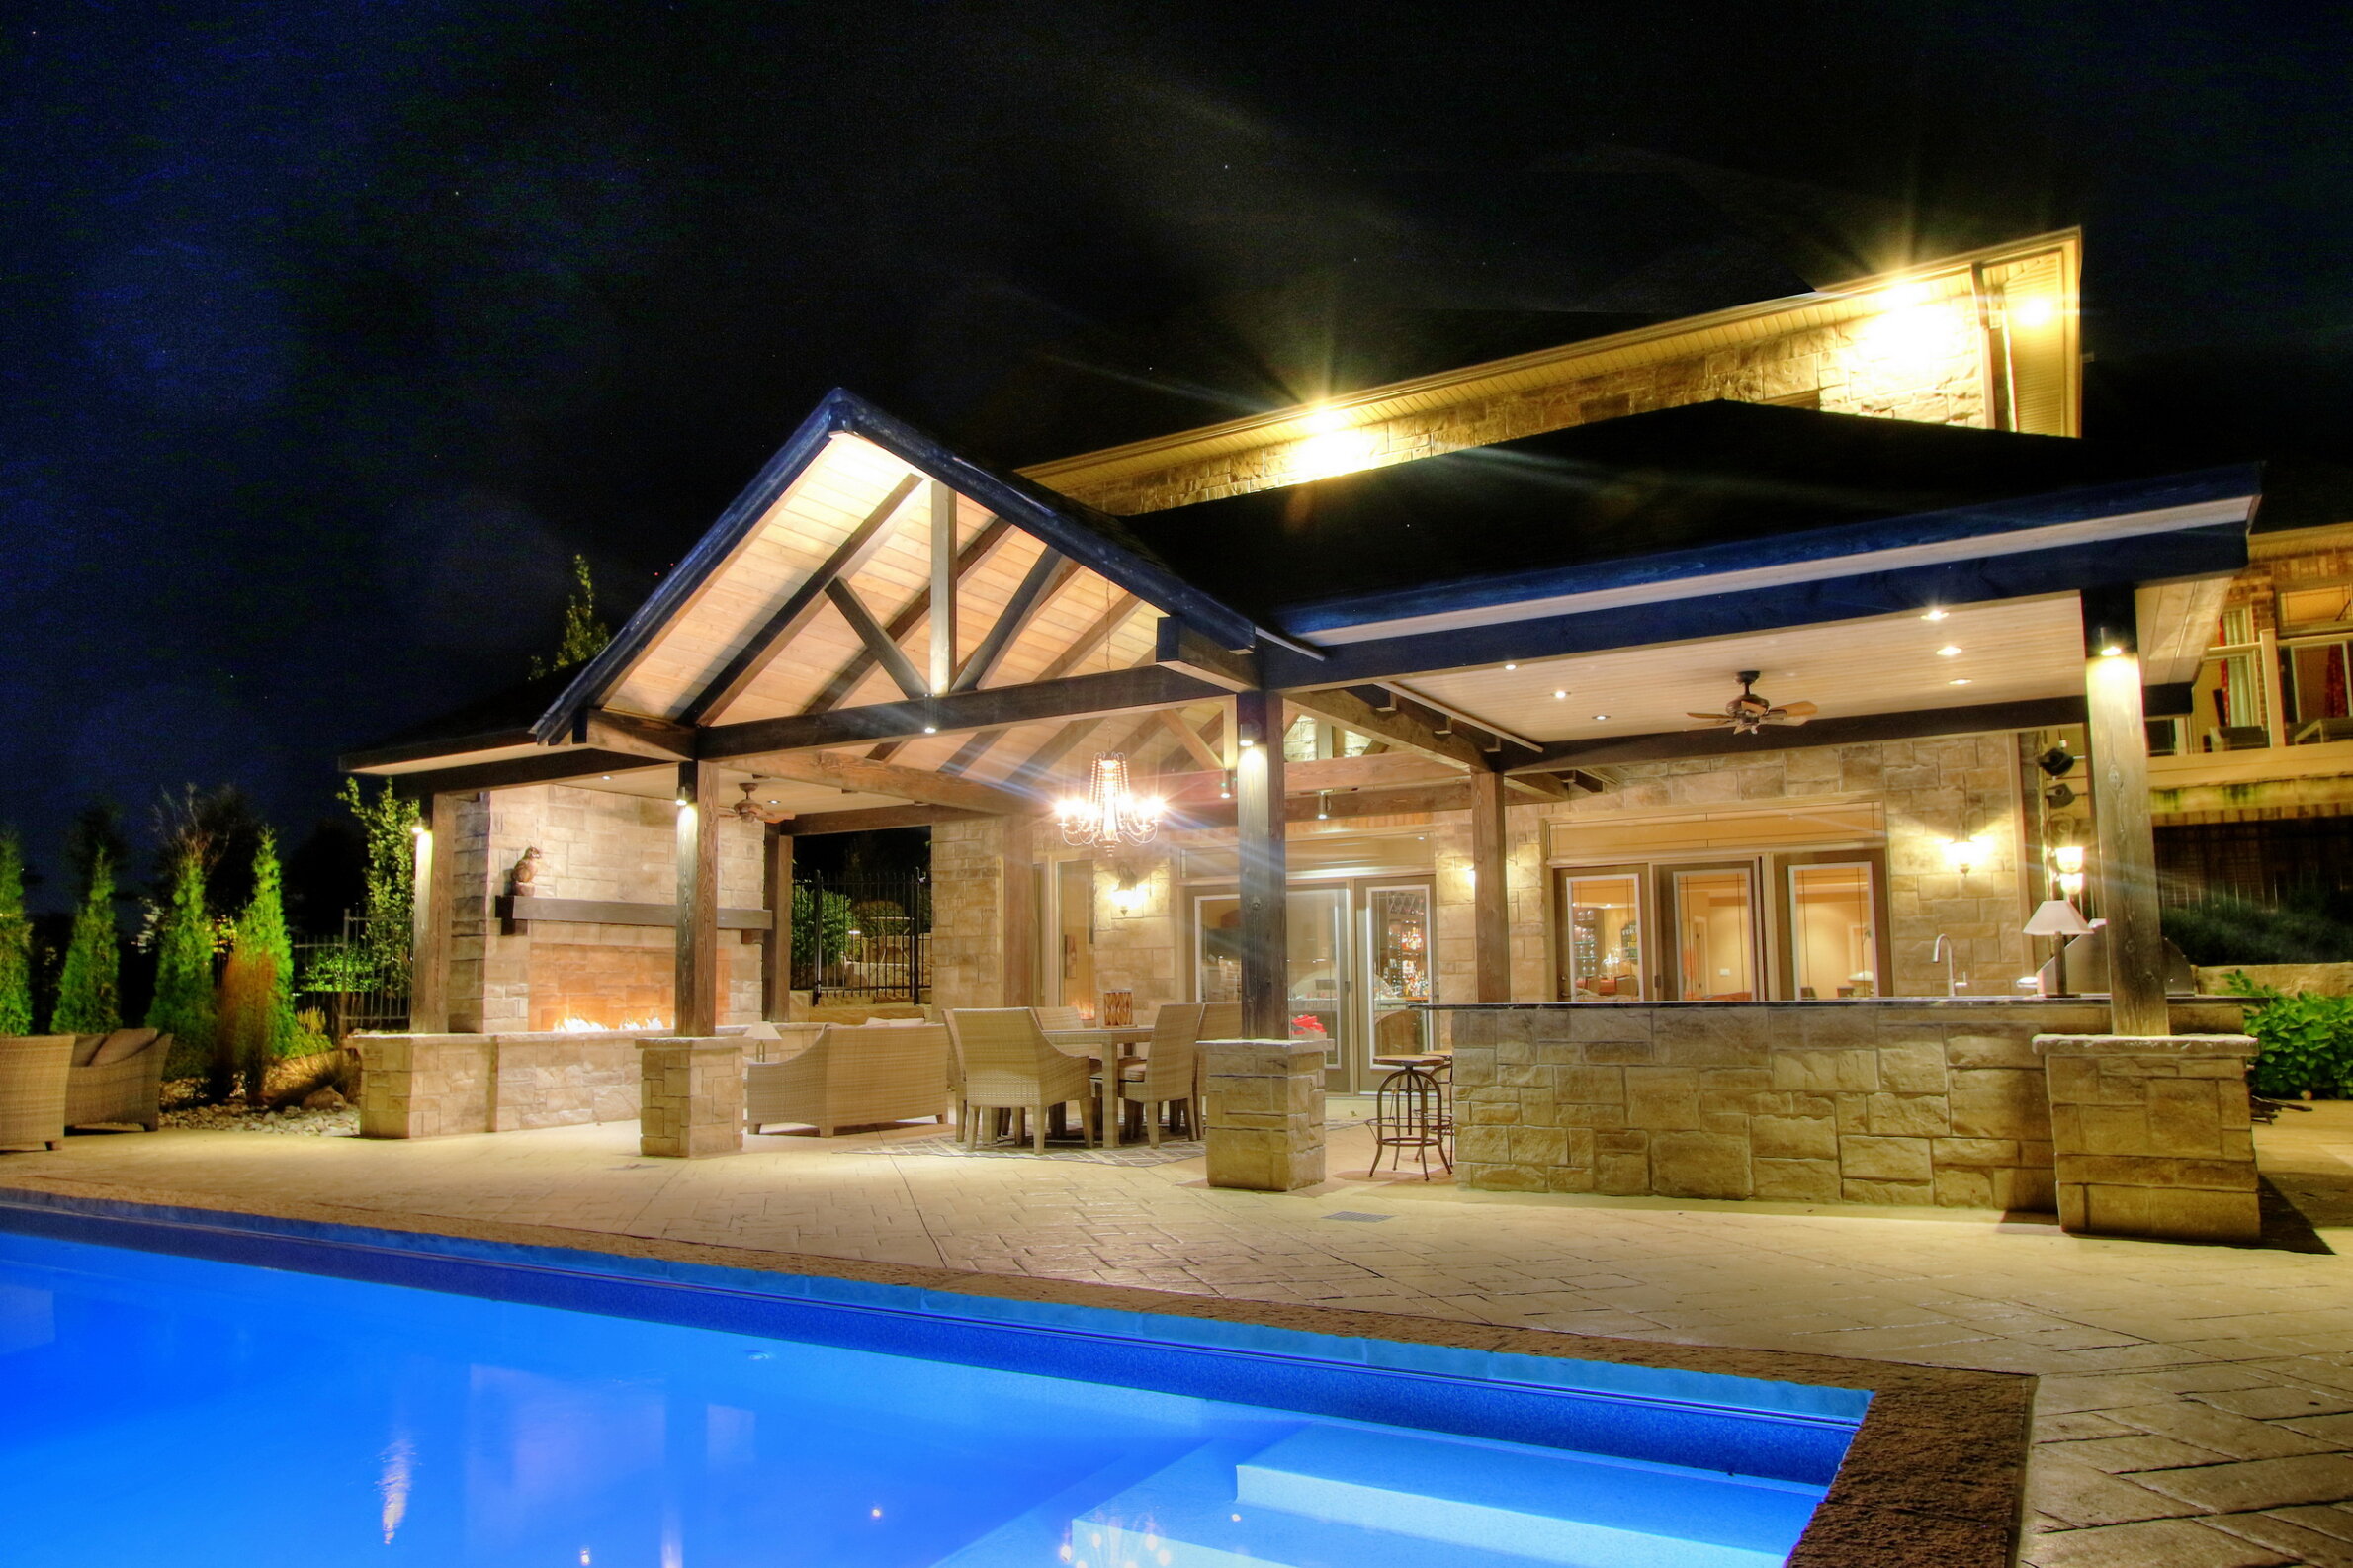 Luxurious poolside pavilion at night with ambient lighting, outdoor fireplace, seating area, chandelier, and a house visible in the background.